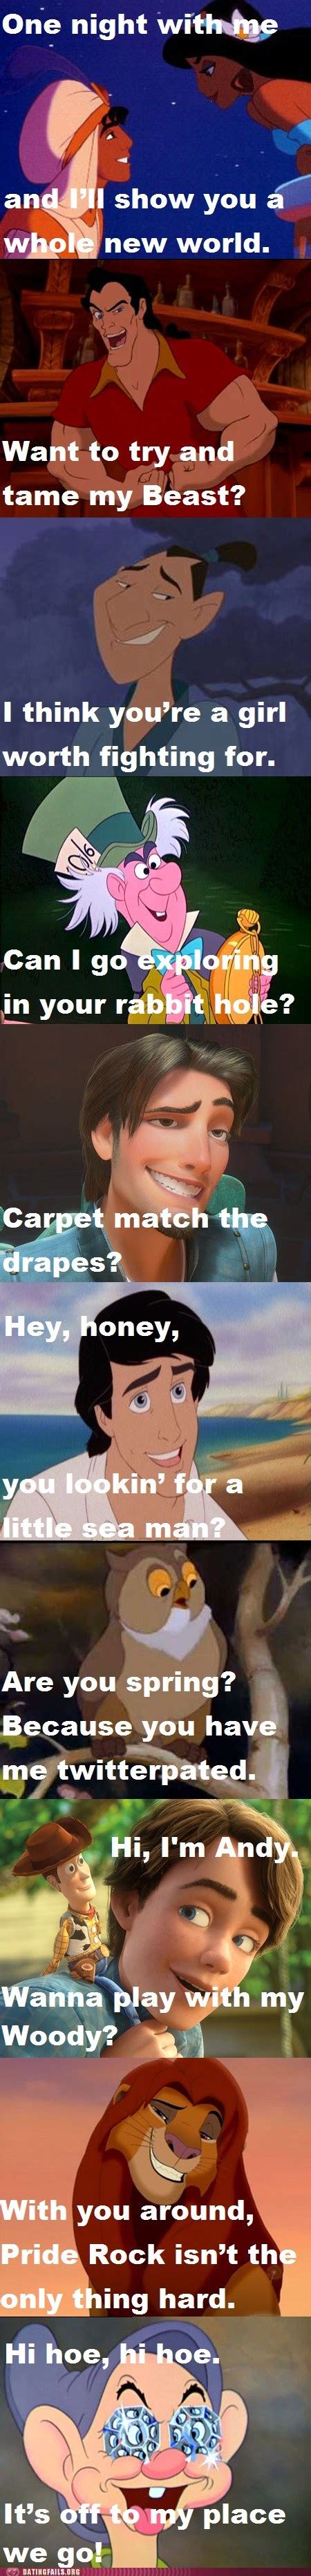 something about disney prince pick up lines is profoundly strange dating fails dating memes